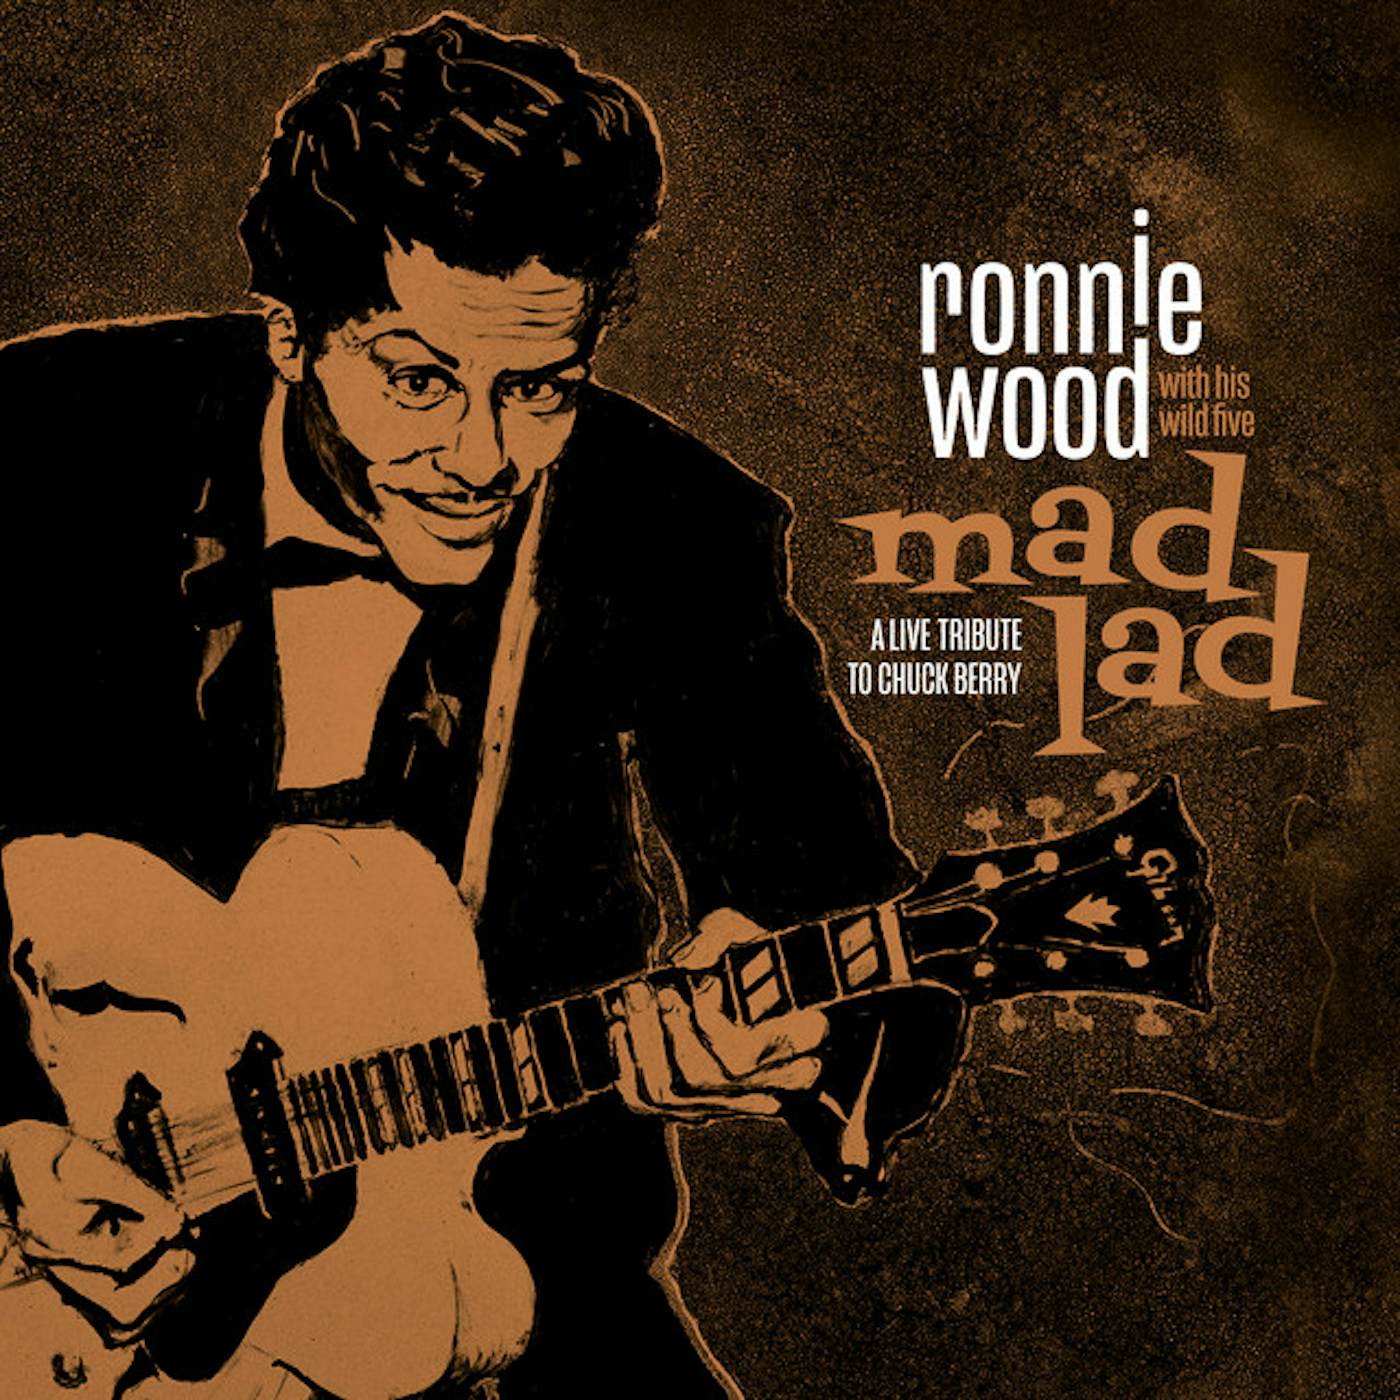 Ronnie Wood & His Wild Five MAD LAD: A LIVE TRIBUTE TO CHUCK BERRY CD